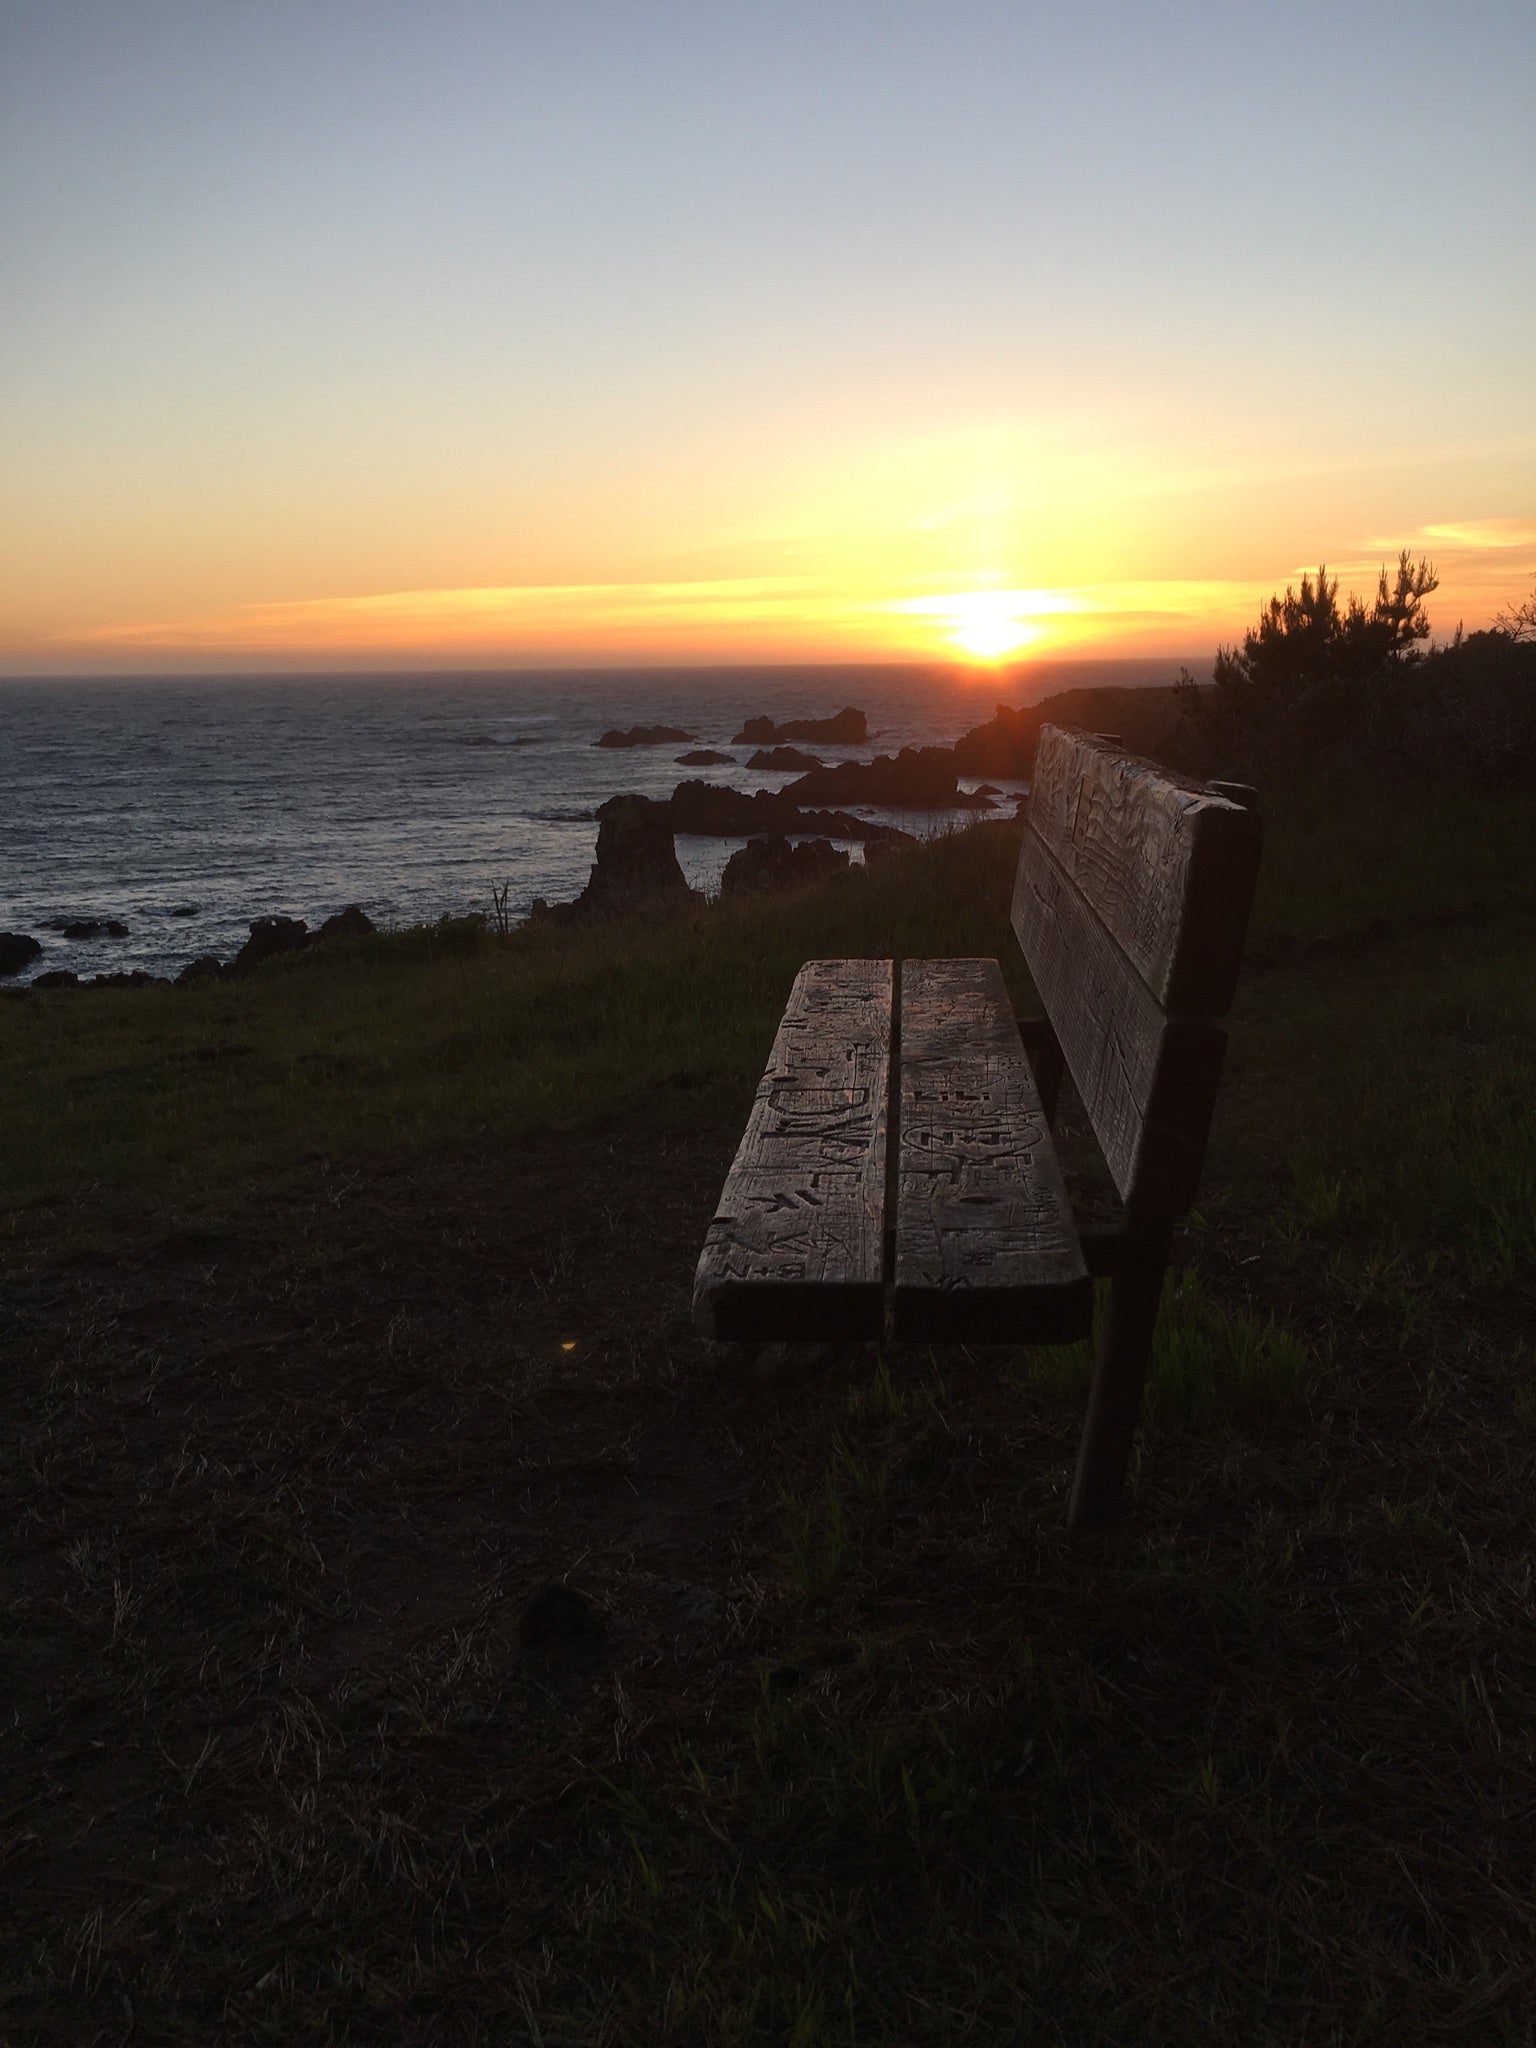 Camper submitted image from Stillwater Cove Regional Park - 3